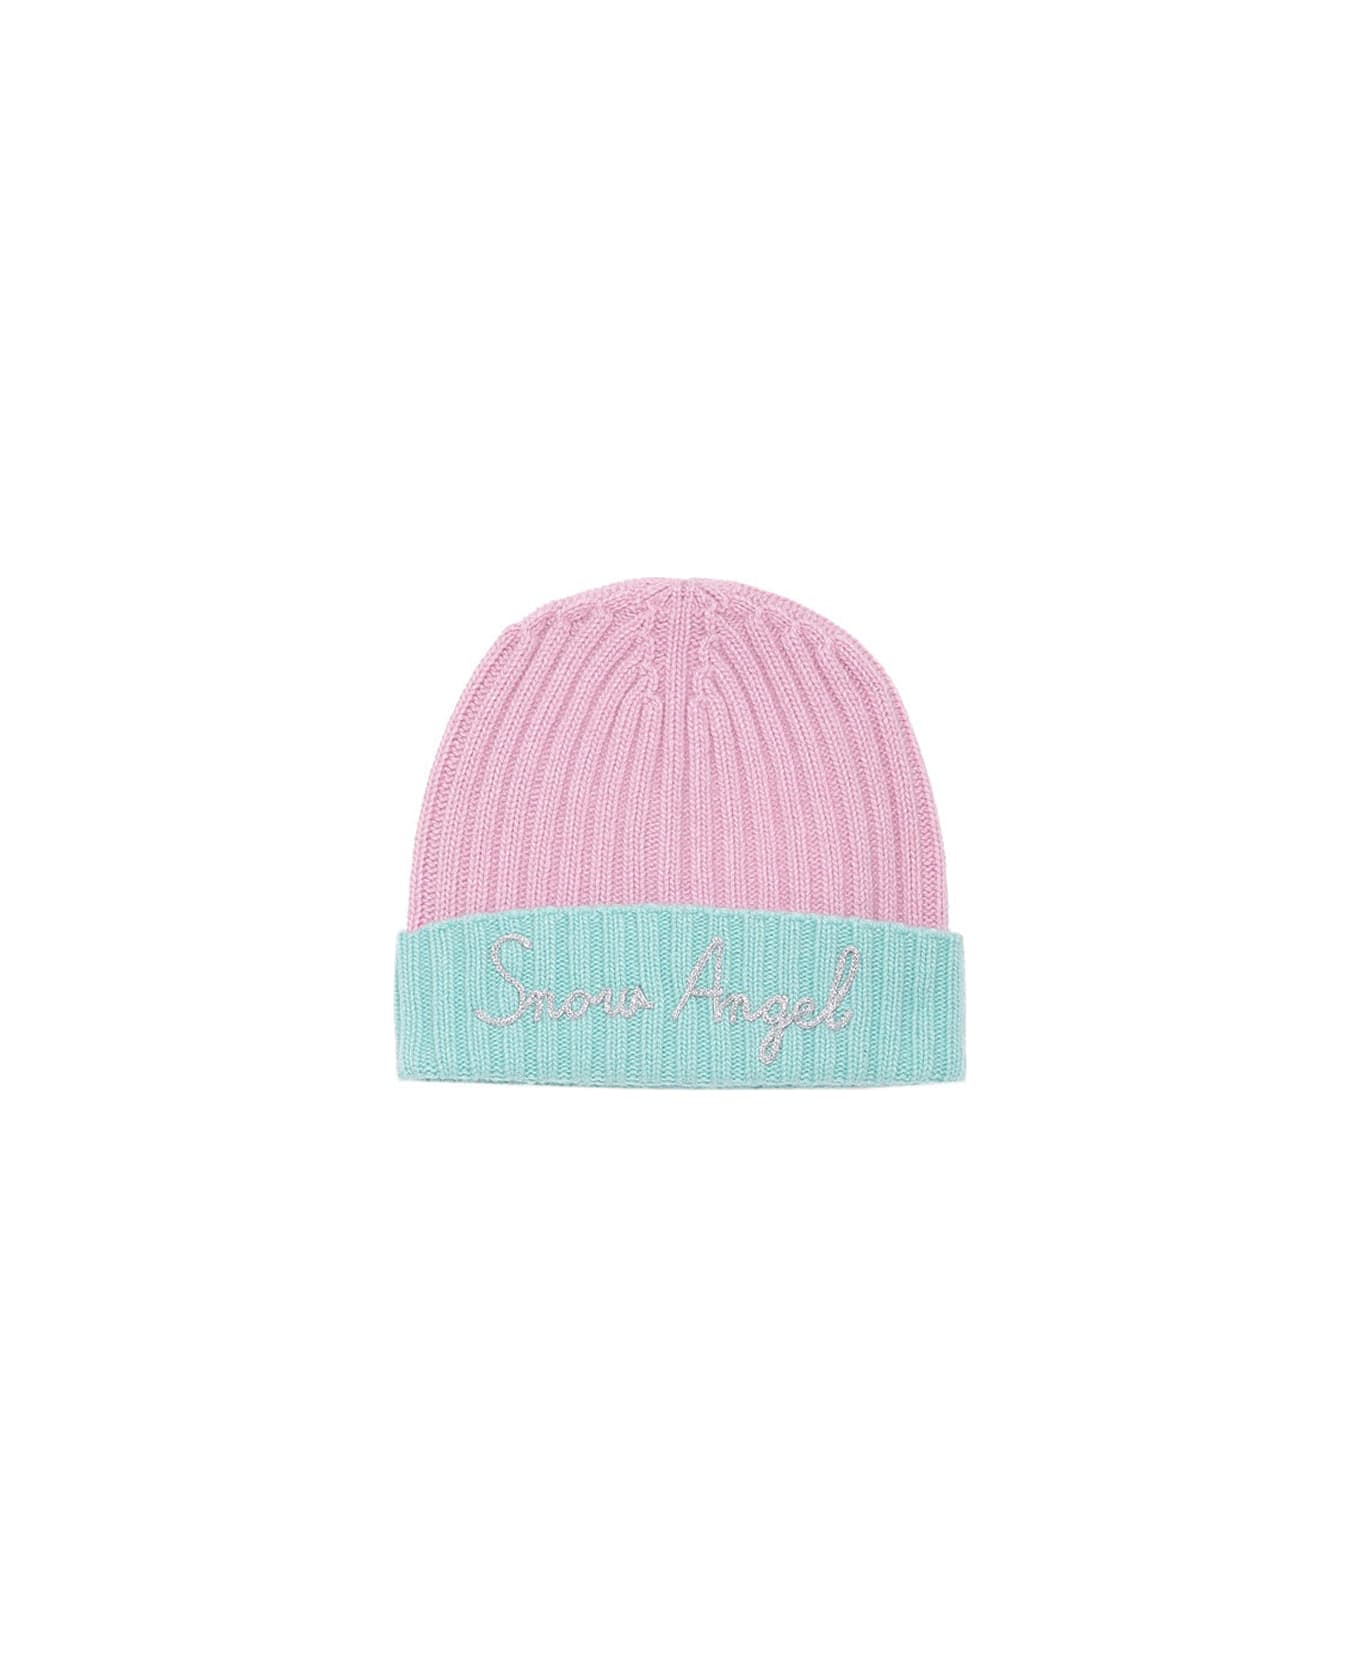 MC2 Saint Barth Woman Hat With Snow Angel Embroidery - PINK